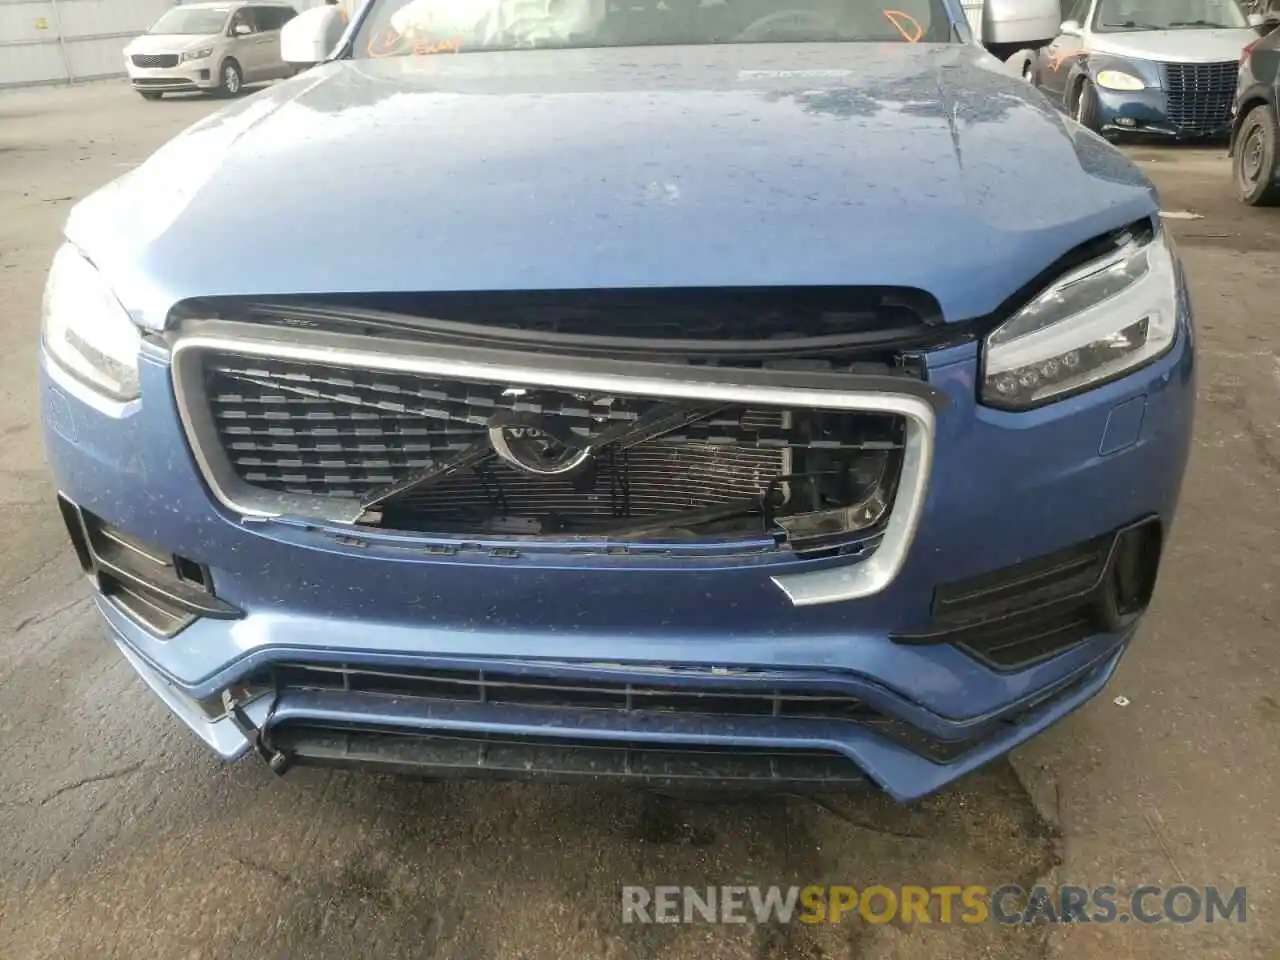 9 Photograph of a damaged car YV4A22PM9K1497904 VOLVO XC90 2019